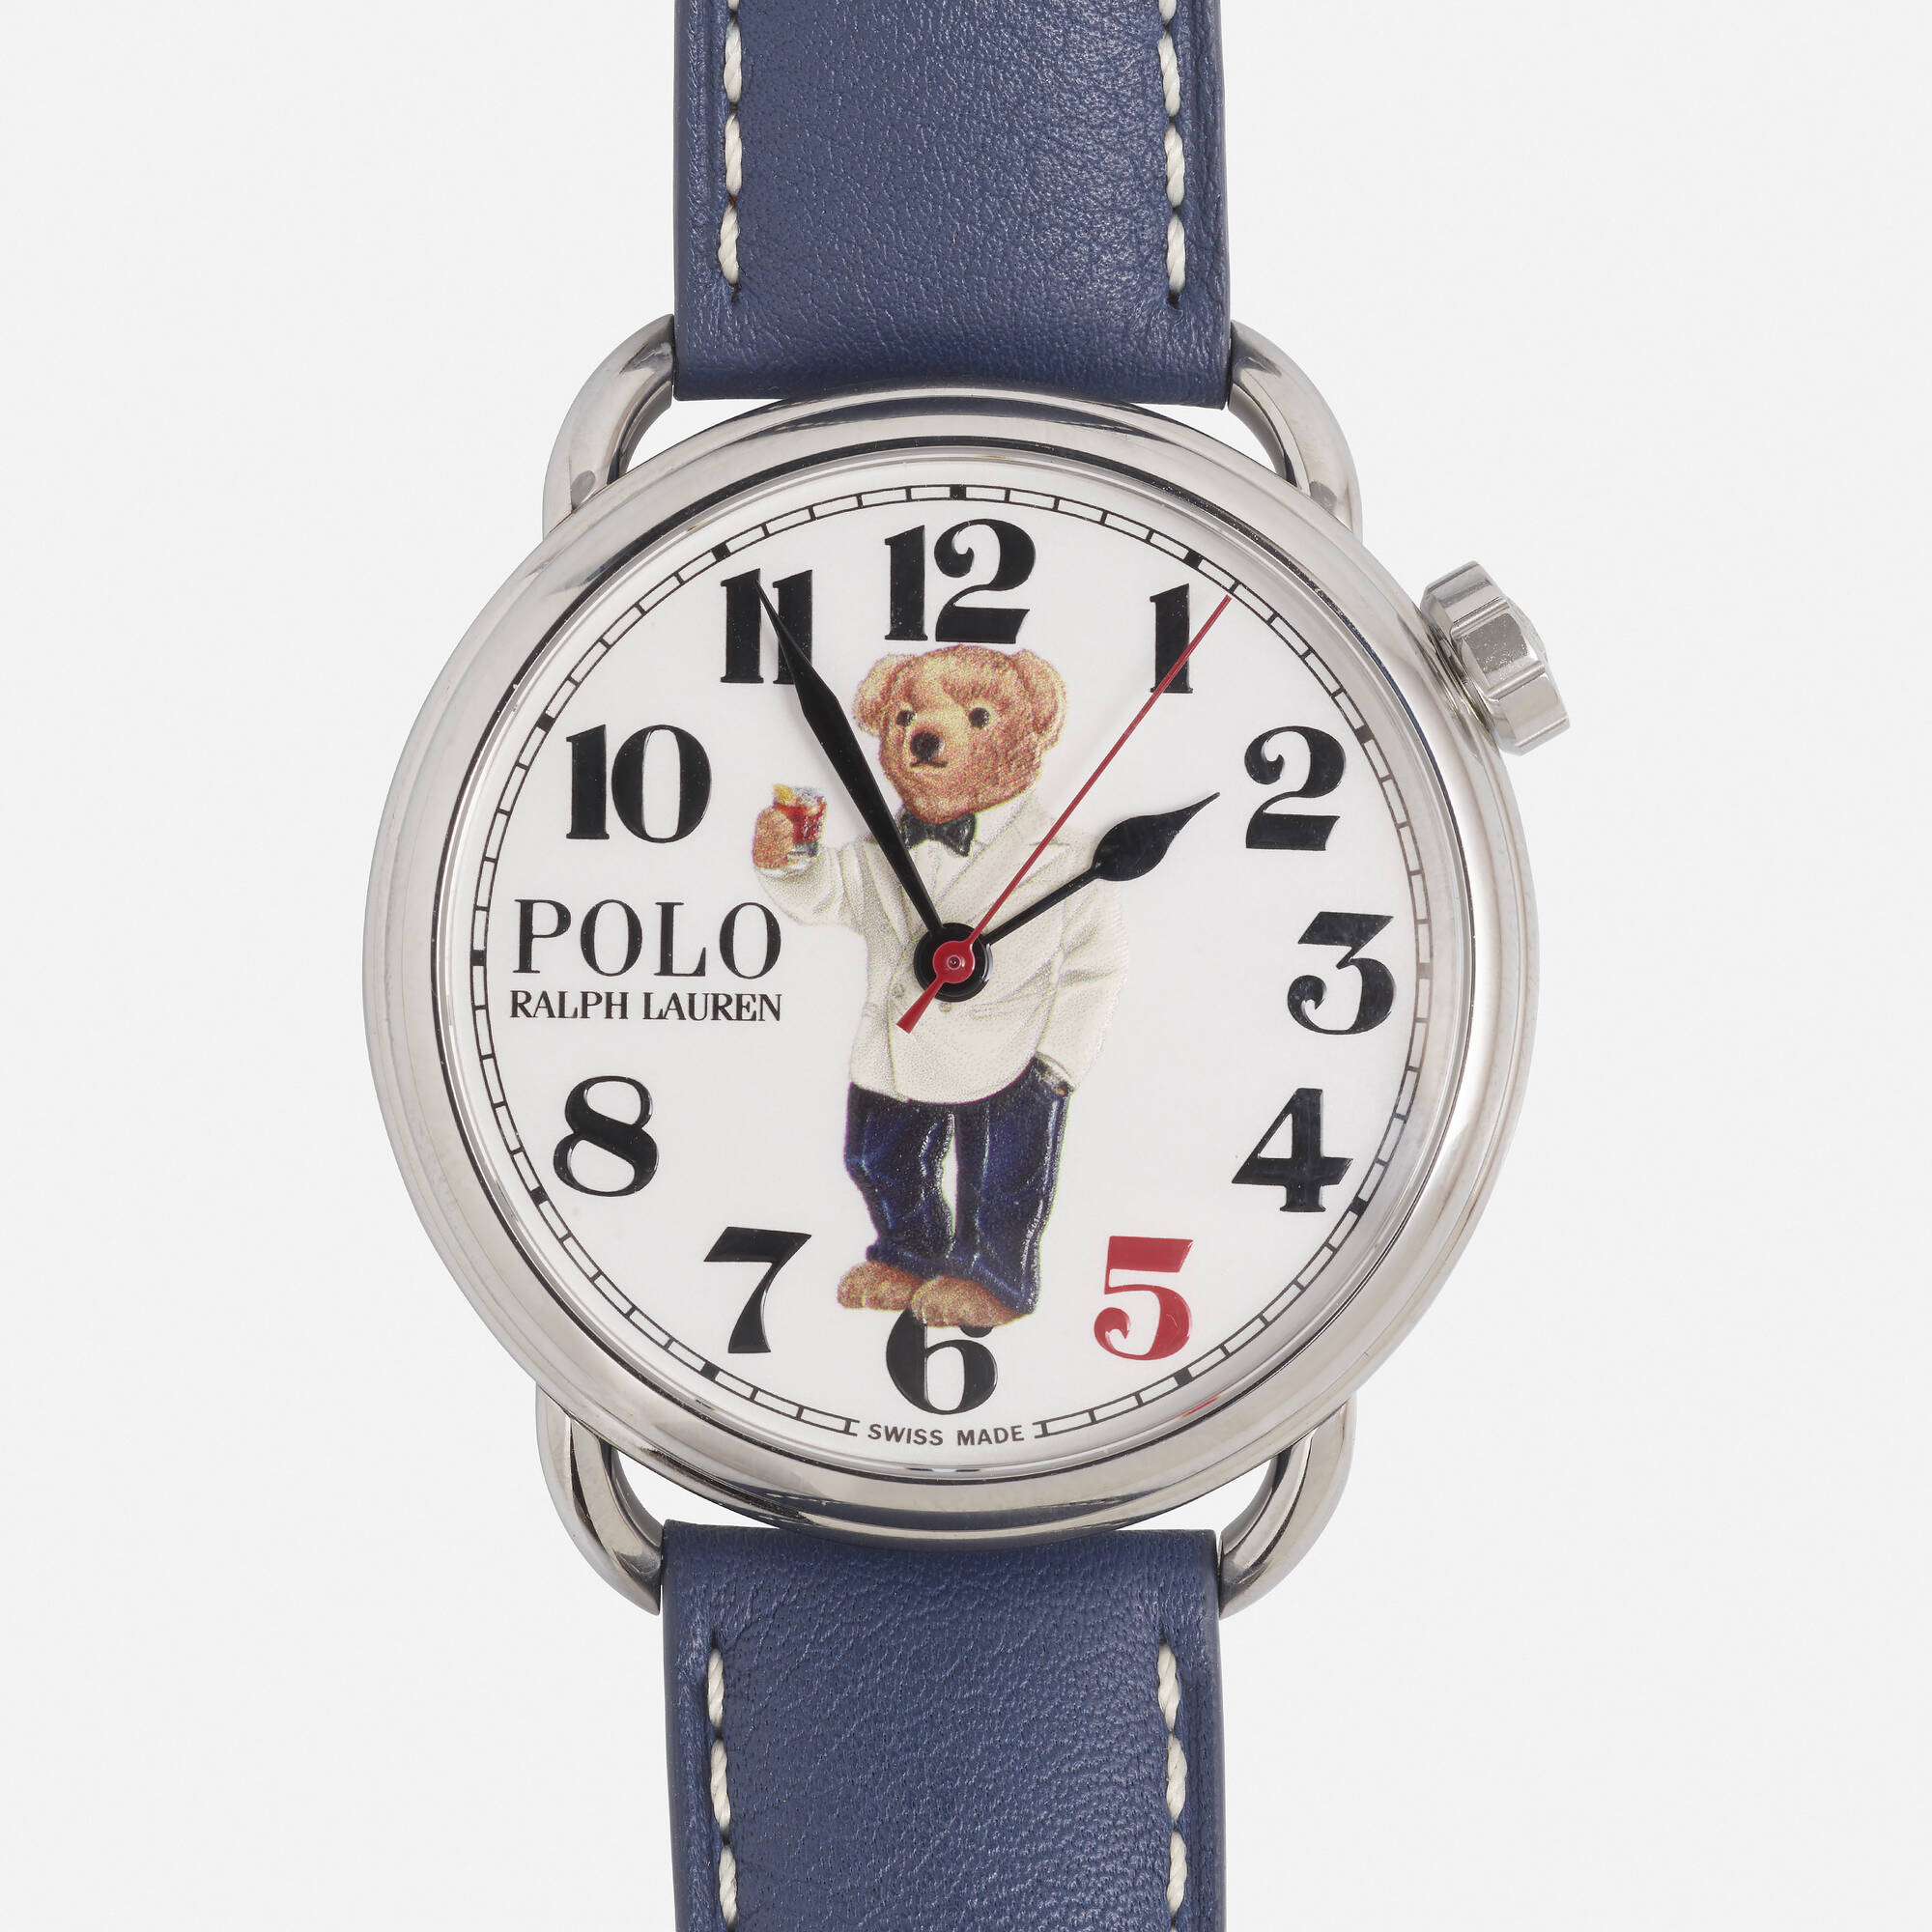 131: RALPH LAUREN, 'Bearfoot Negroni Bear for The Rake' stainless steel  wristwatch < Watches, 5 May 2022 < Auctions | Rago Auctions